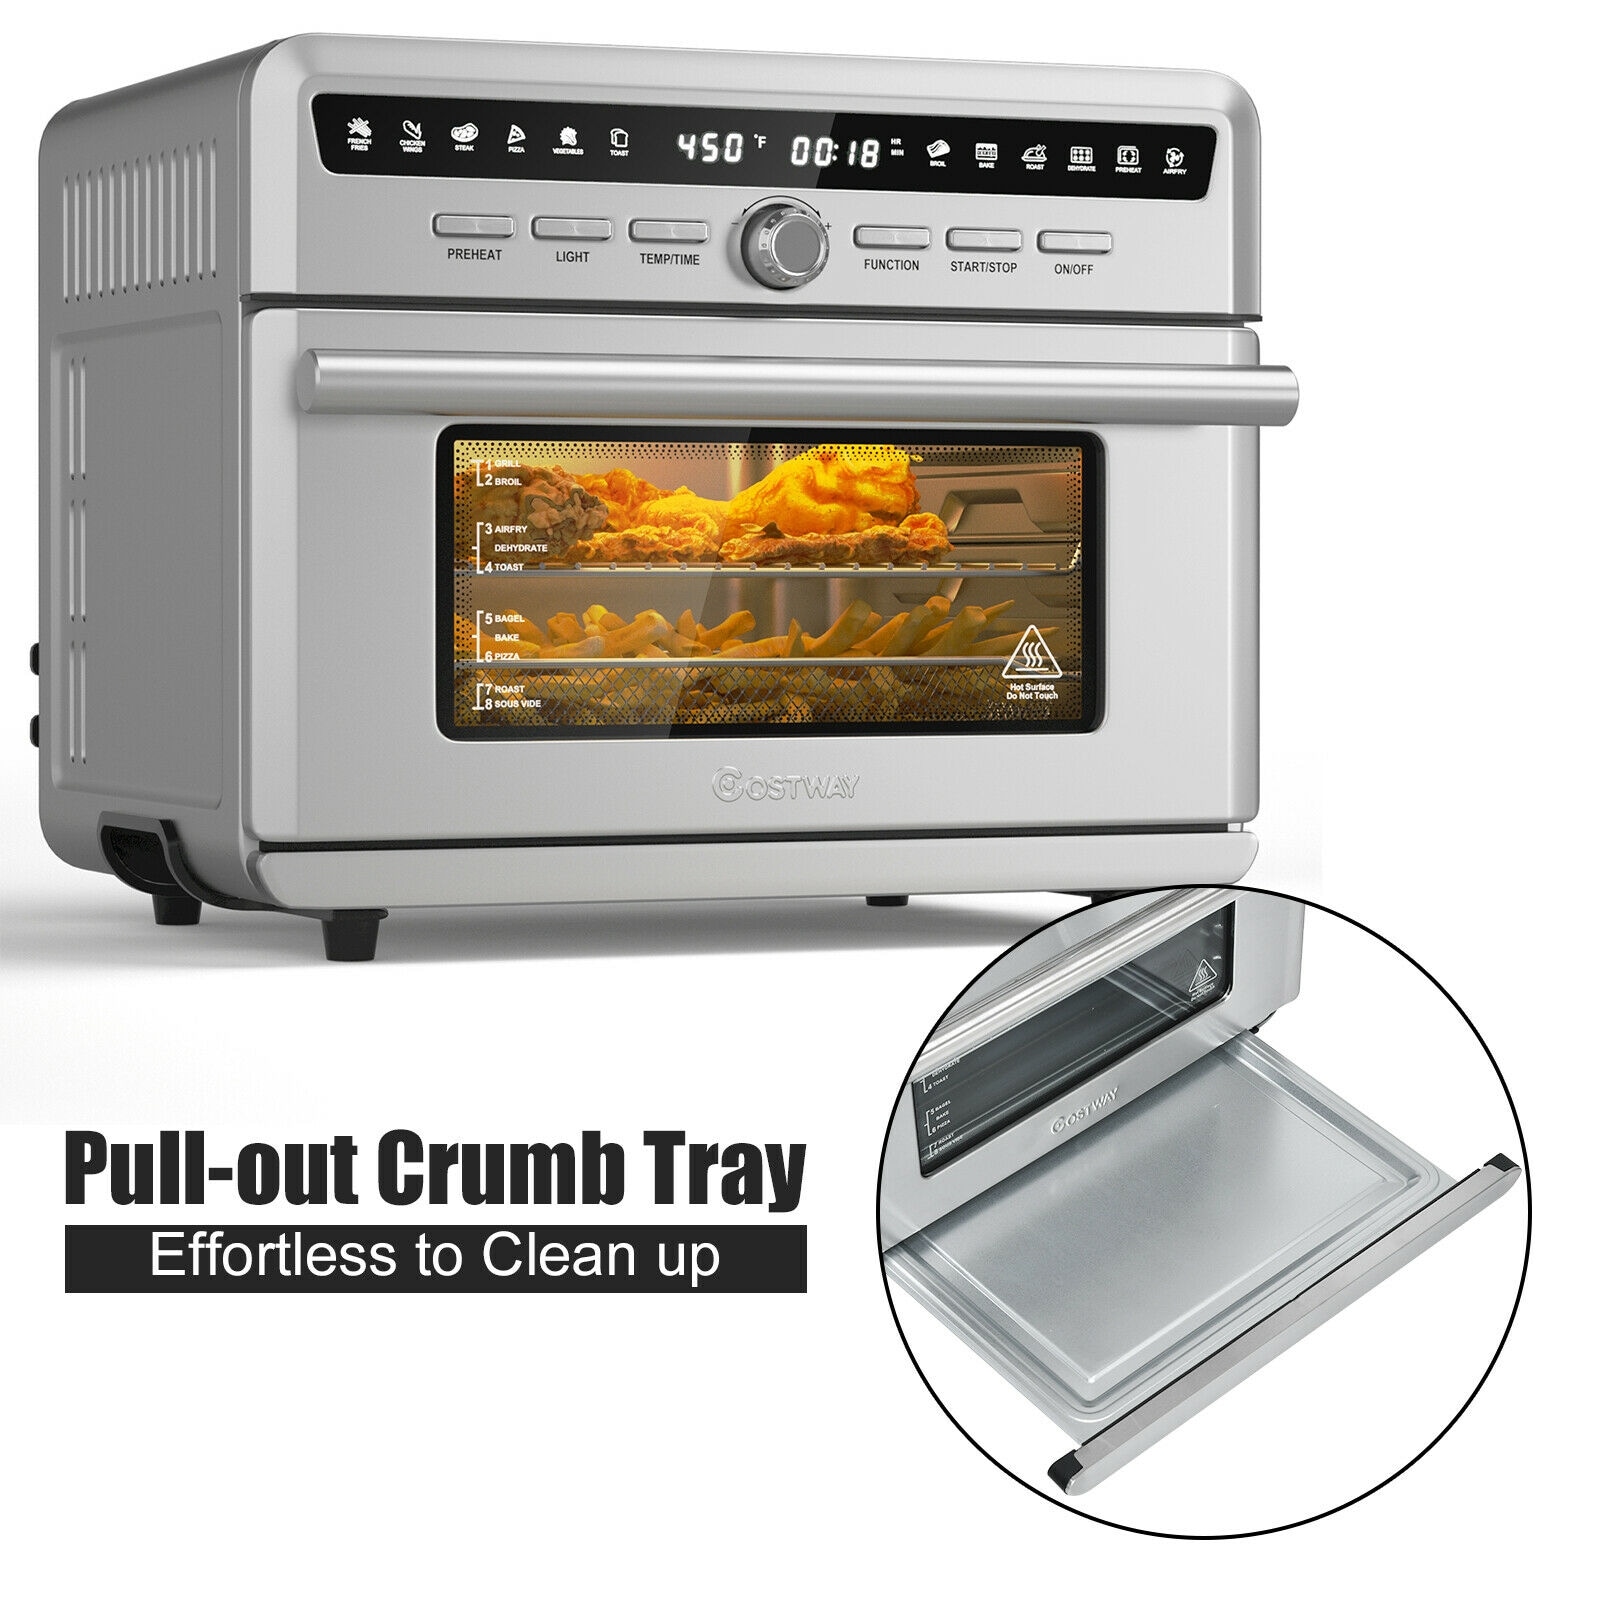 VEVOR 7-IN-1 Air Fryer Toaster Oven, 18L Convection Oven, 1700W